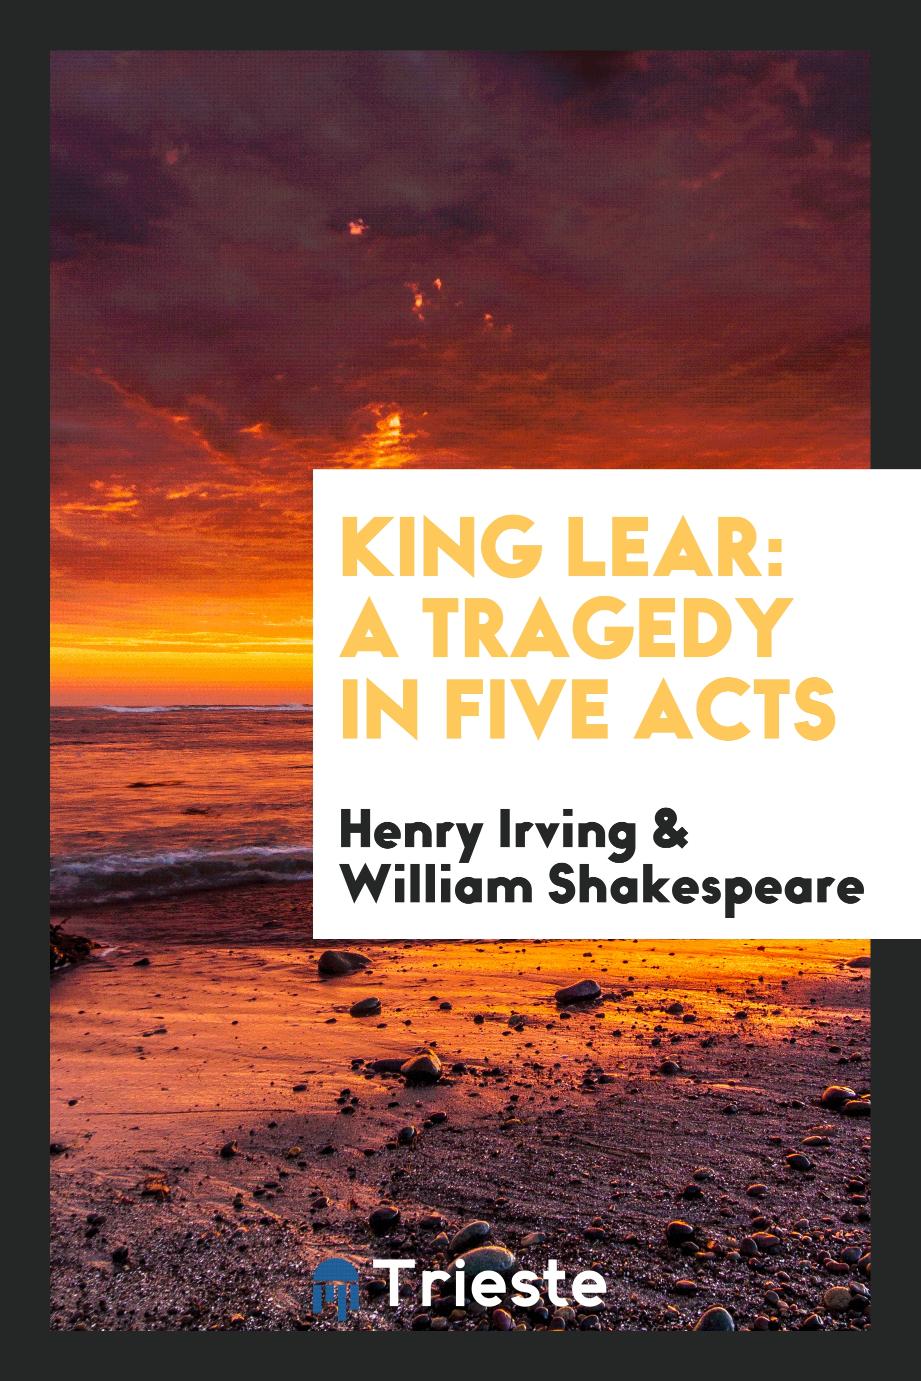 King Lear: A Tragedy in Five Acts